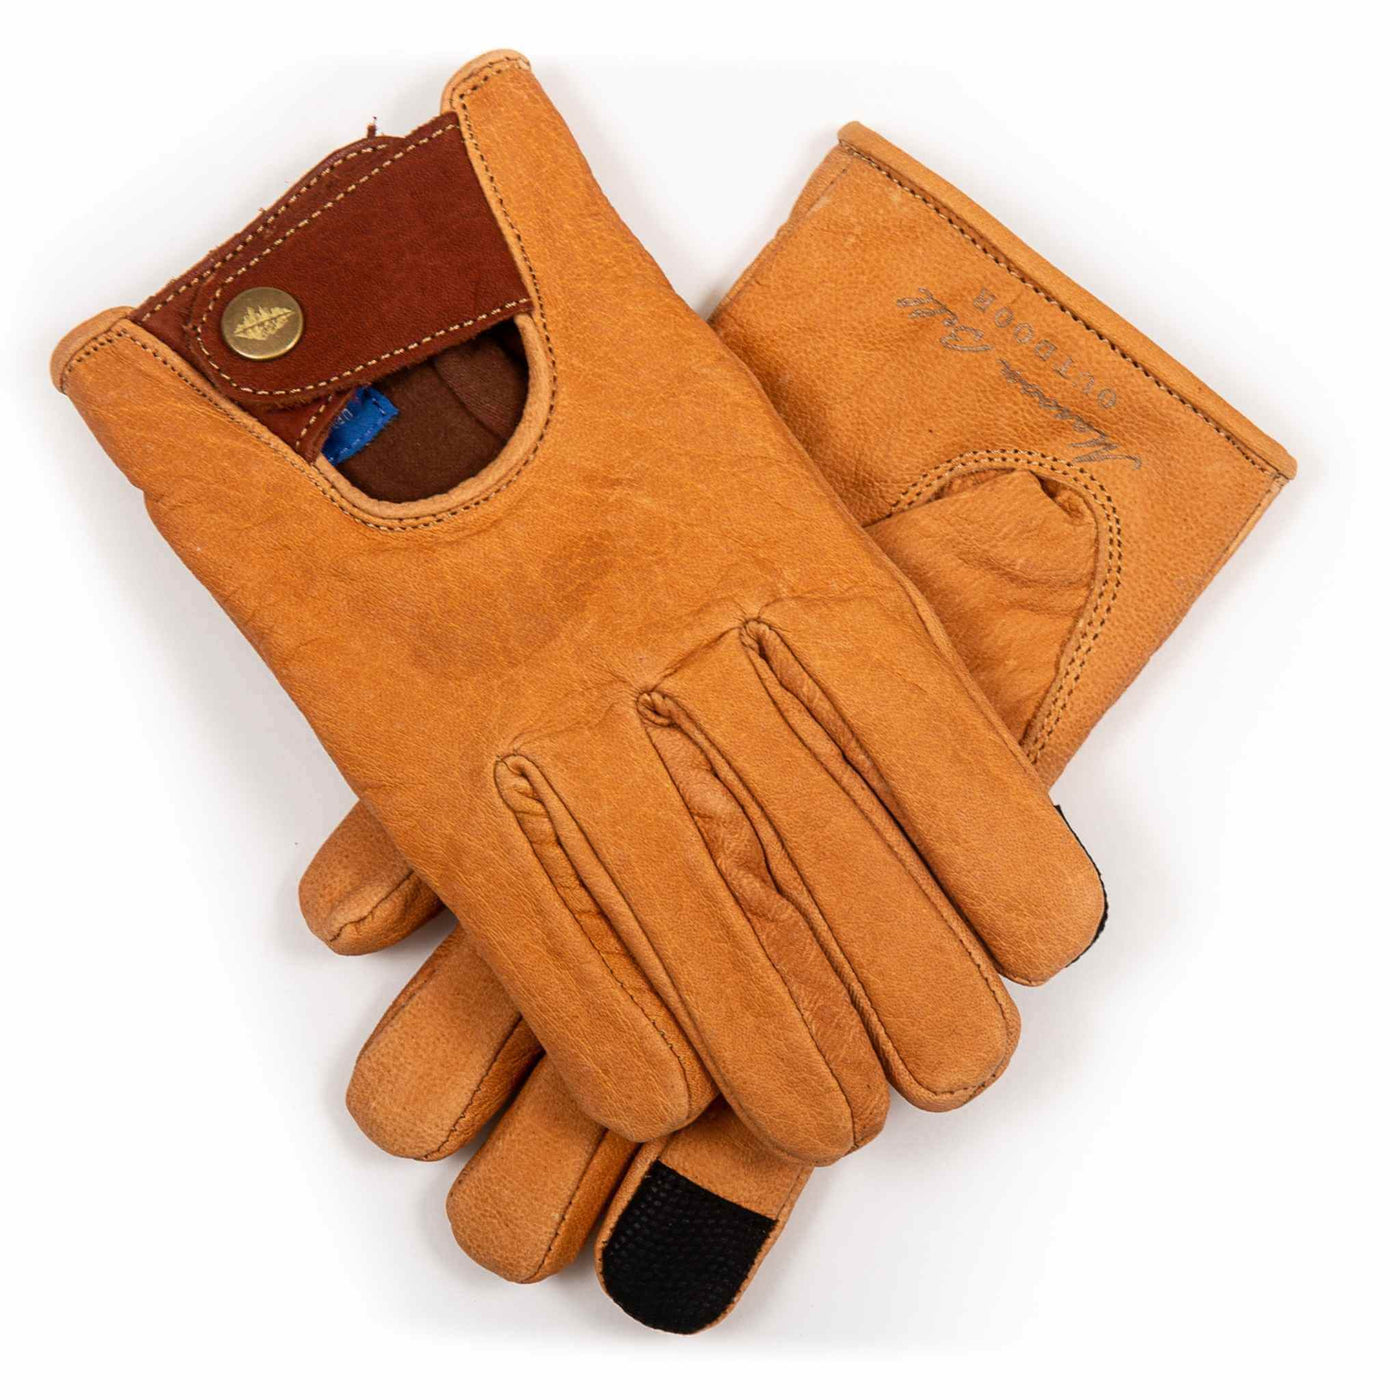 A crossed pair of buffalo leather outdoor gloves from Maroon Bell Outdoor, featuring a button clasp on the back and a smart index finger.